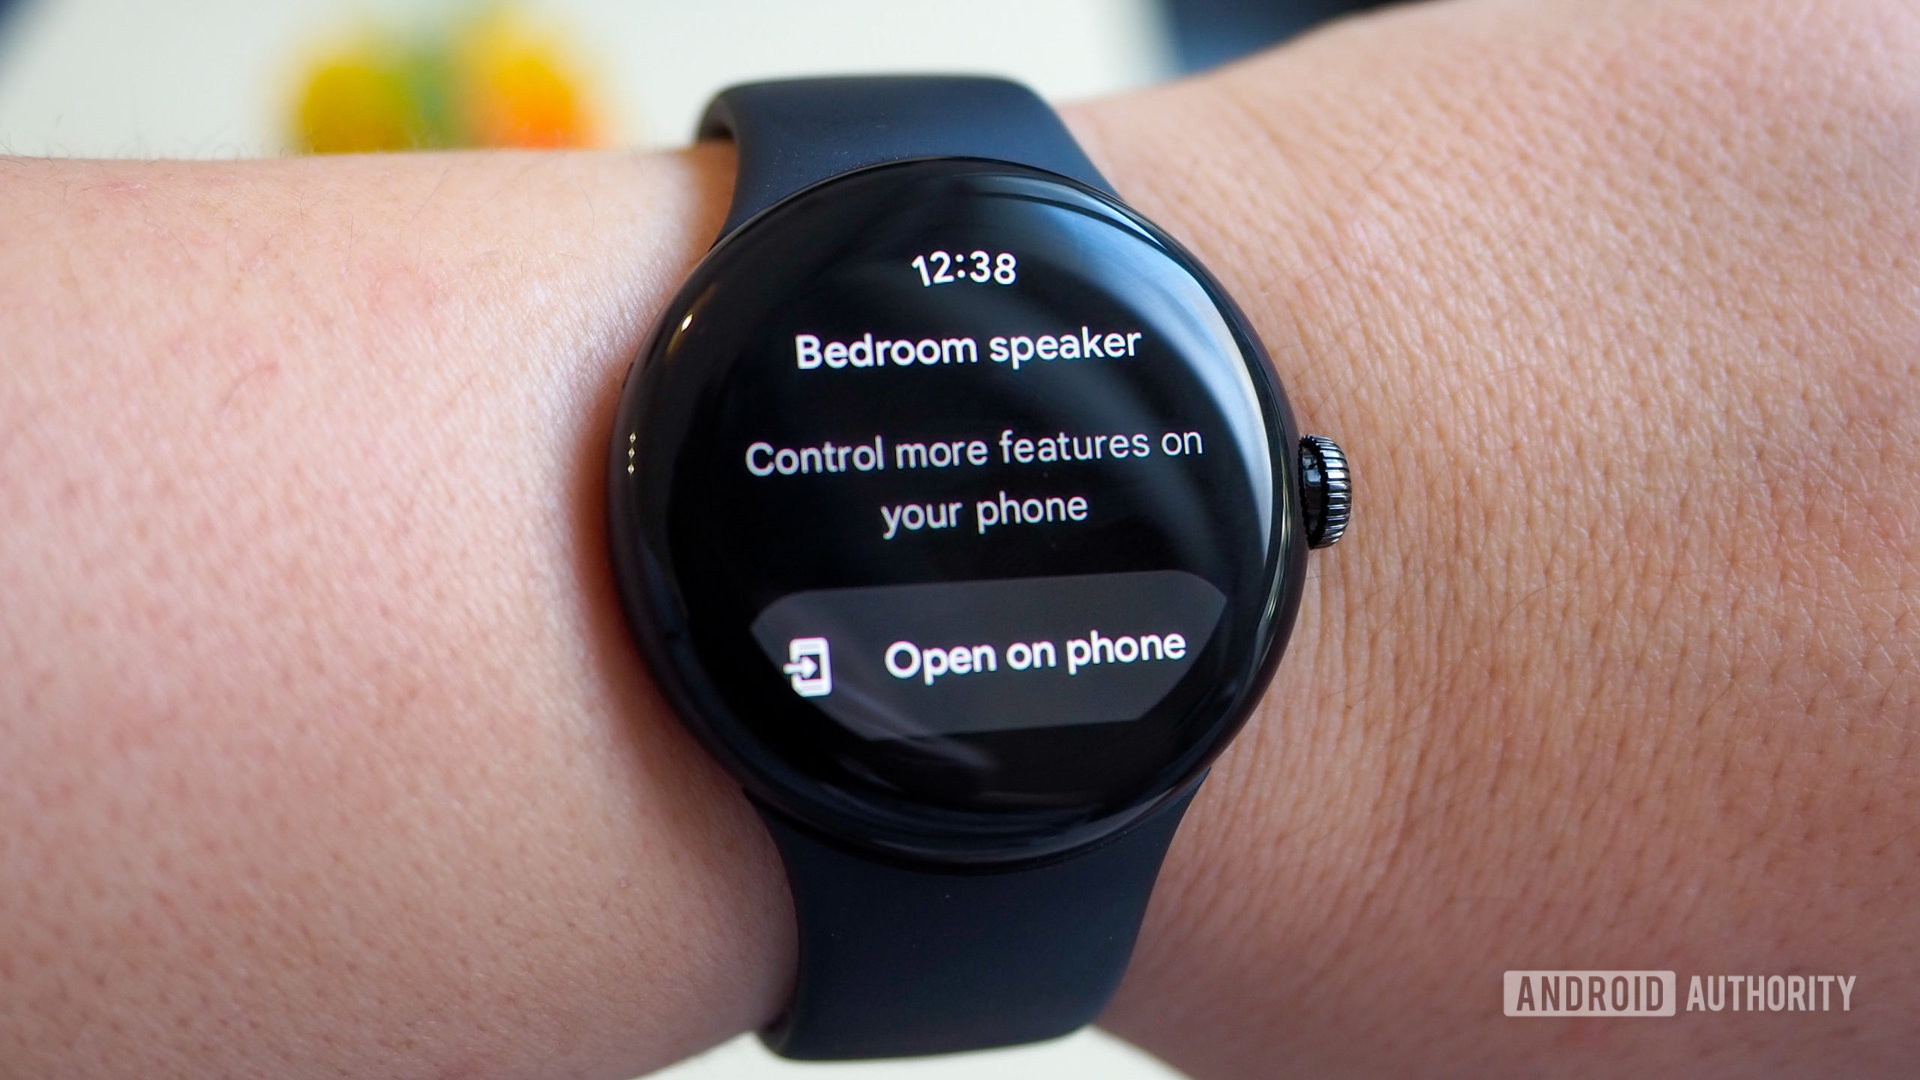 Google Home app on Pixel Watch showing prompt to open app on phone for more controls